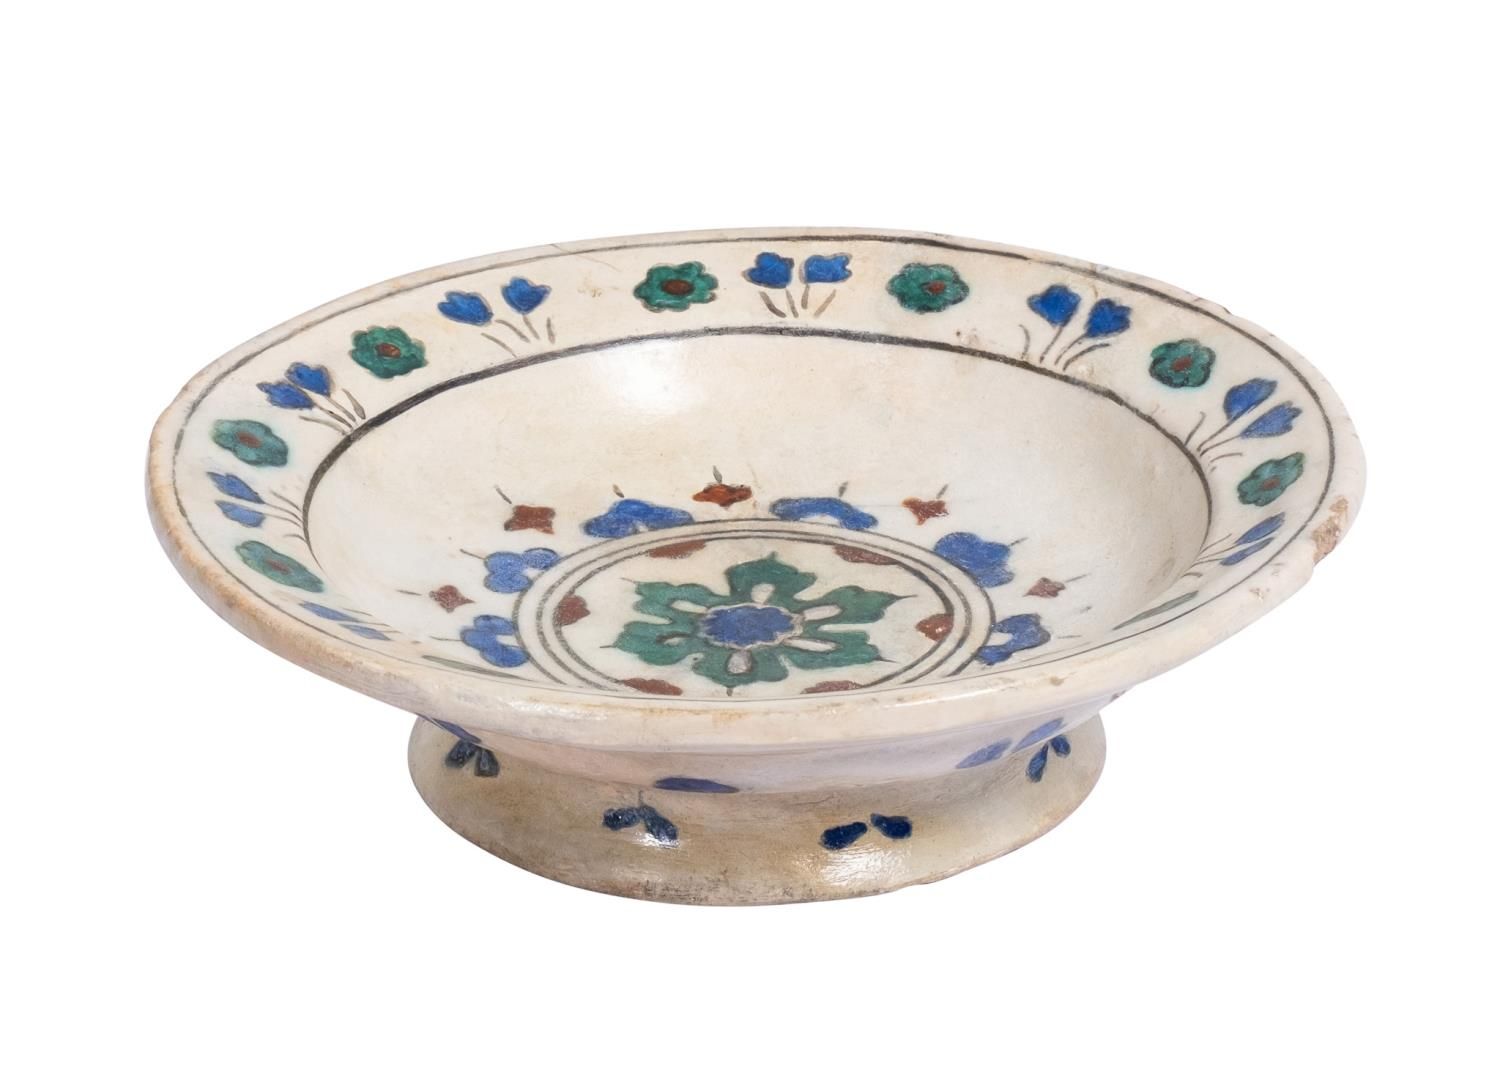 Null A EARLY FOOTED IZNIK FLORAL DISH, CIRCA 1520-1530, 16TH CENTURY
 
 Of round&hellip;